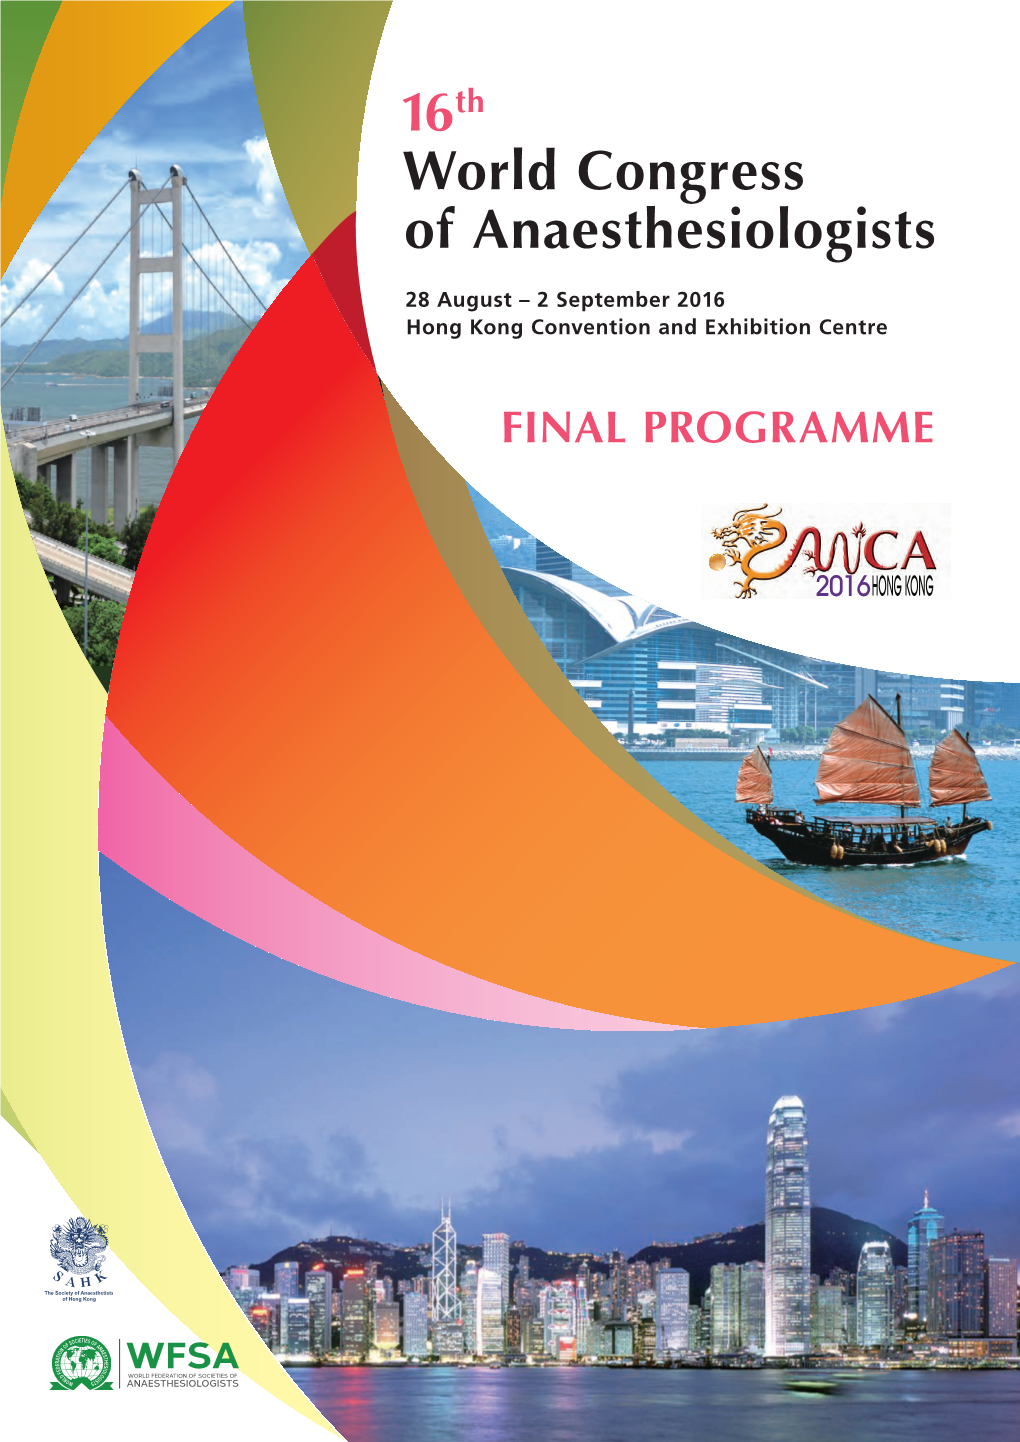 WCA 2016 Programme Overview.Pdf